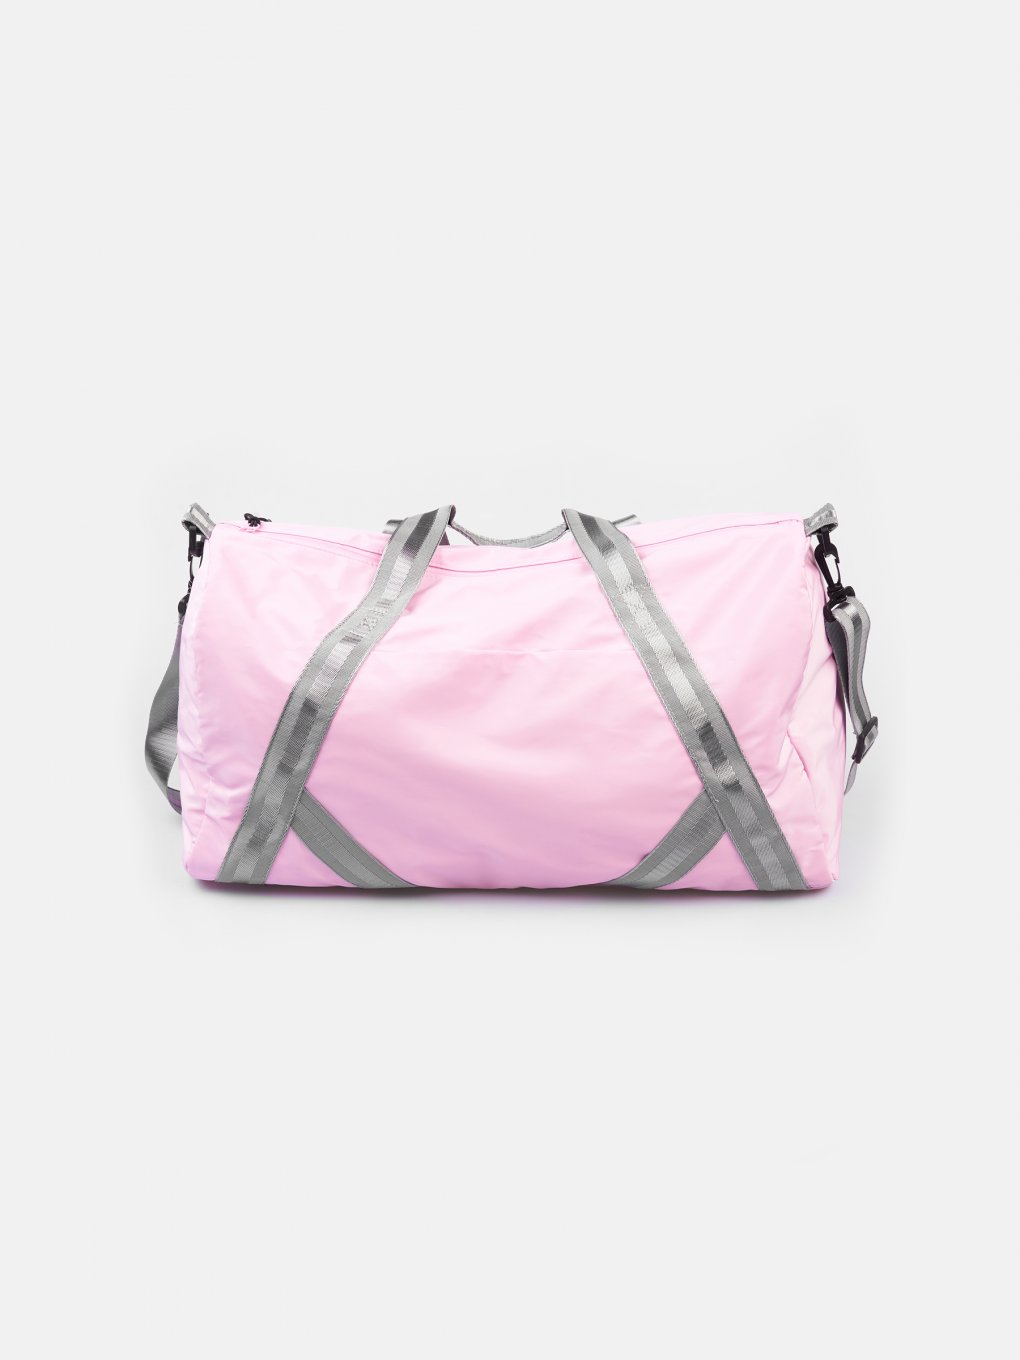 Gym bag with long strap